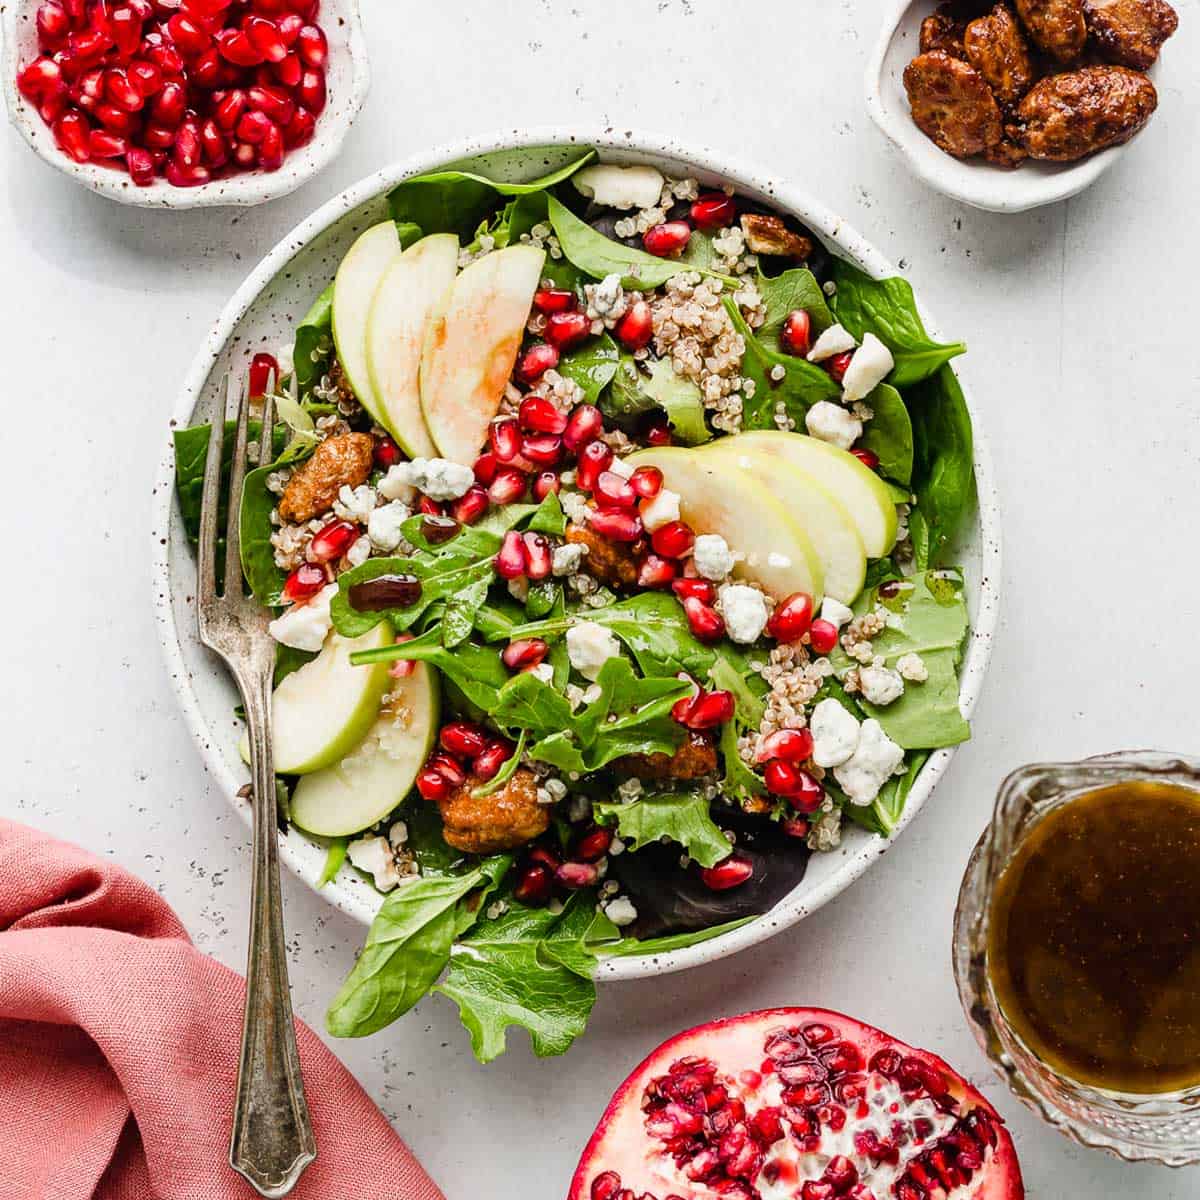 Pomegranate Salad topped with pears, pomegranate arils, pecans, and cheese, on a white background.